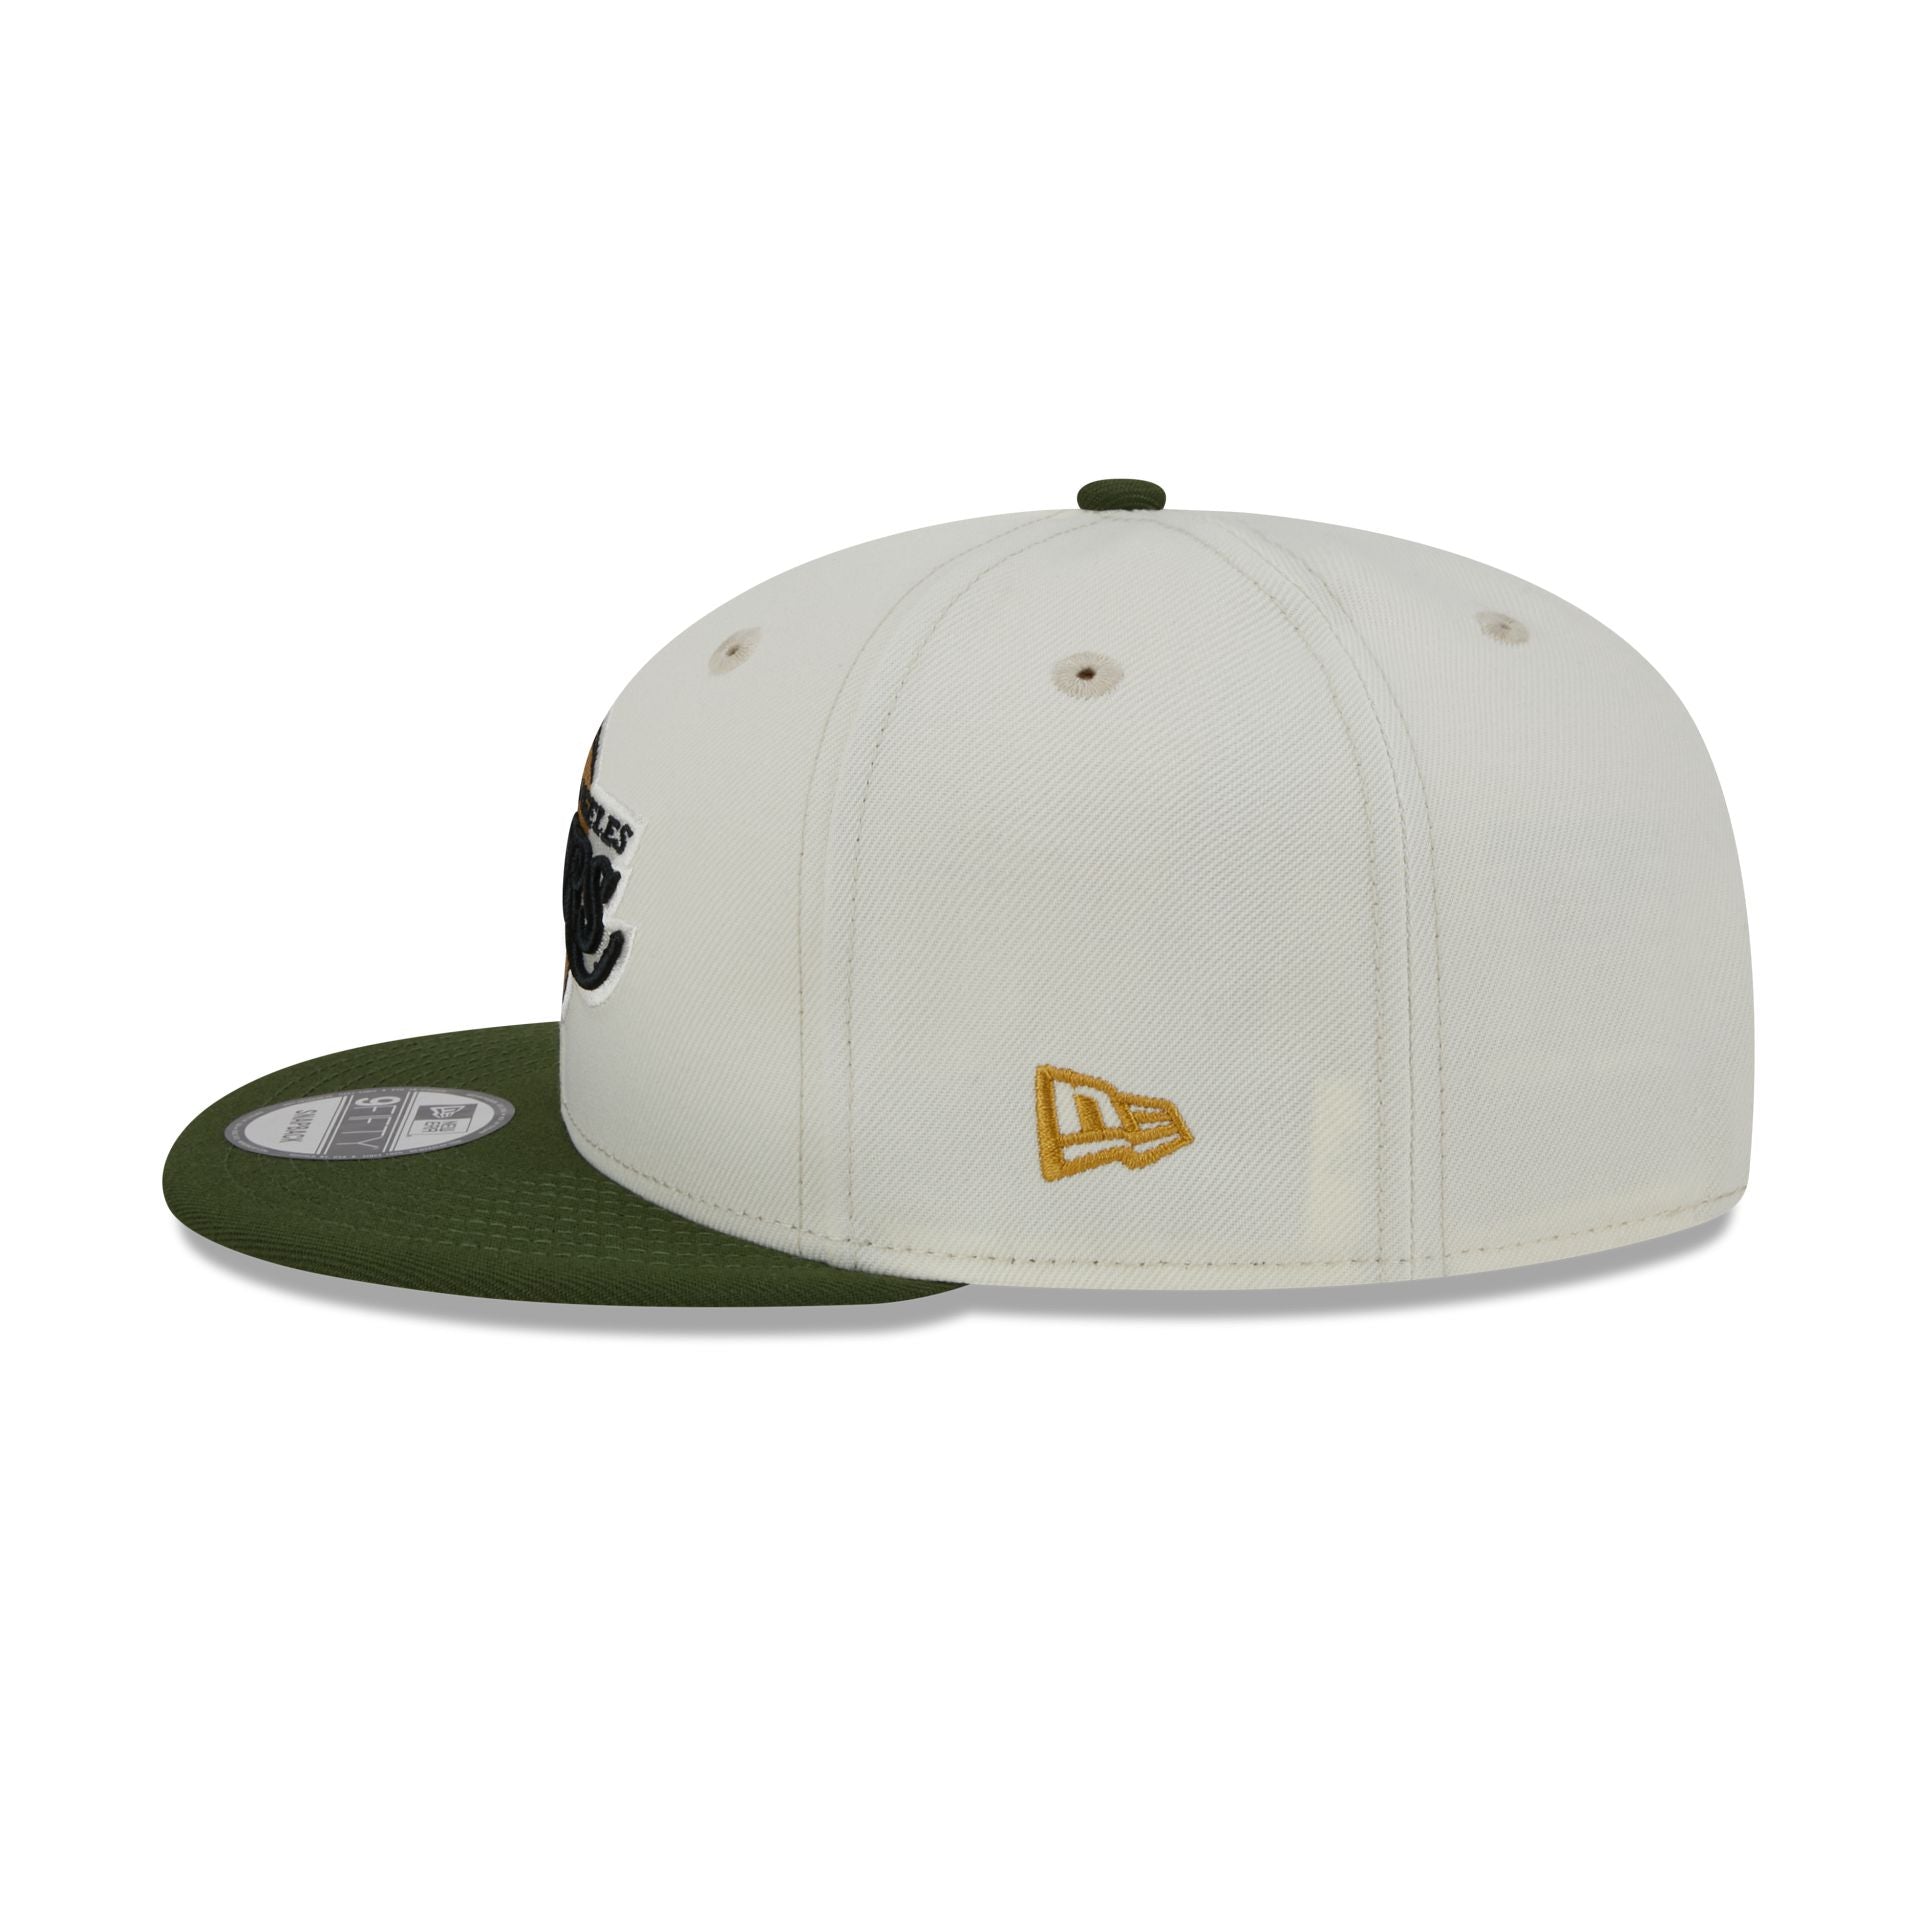 Los Angeles Lakers Emerald 9FIFTY Snapback